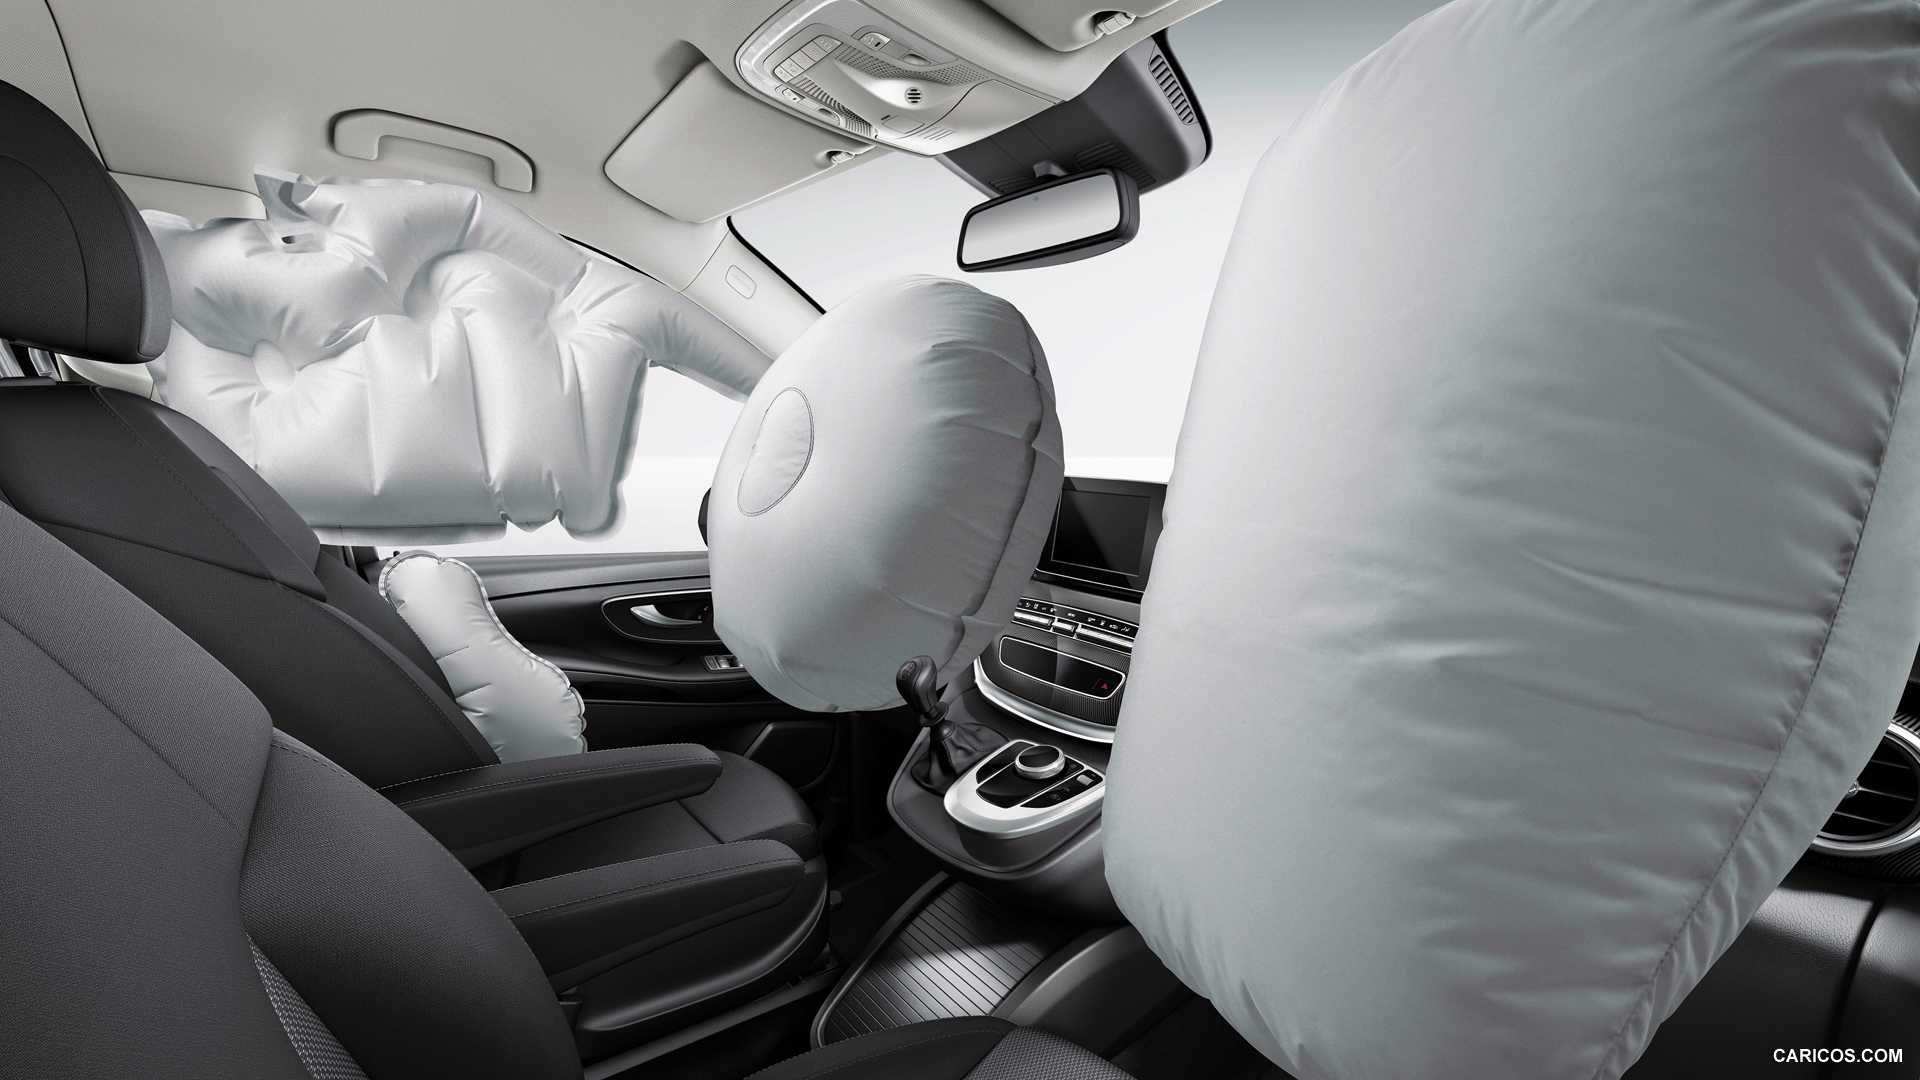 2015 Mercedes-Benz V-Class - Airbags - Interior, #234 of 254